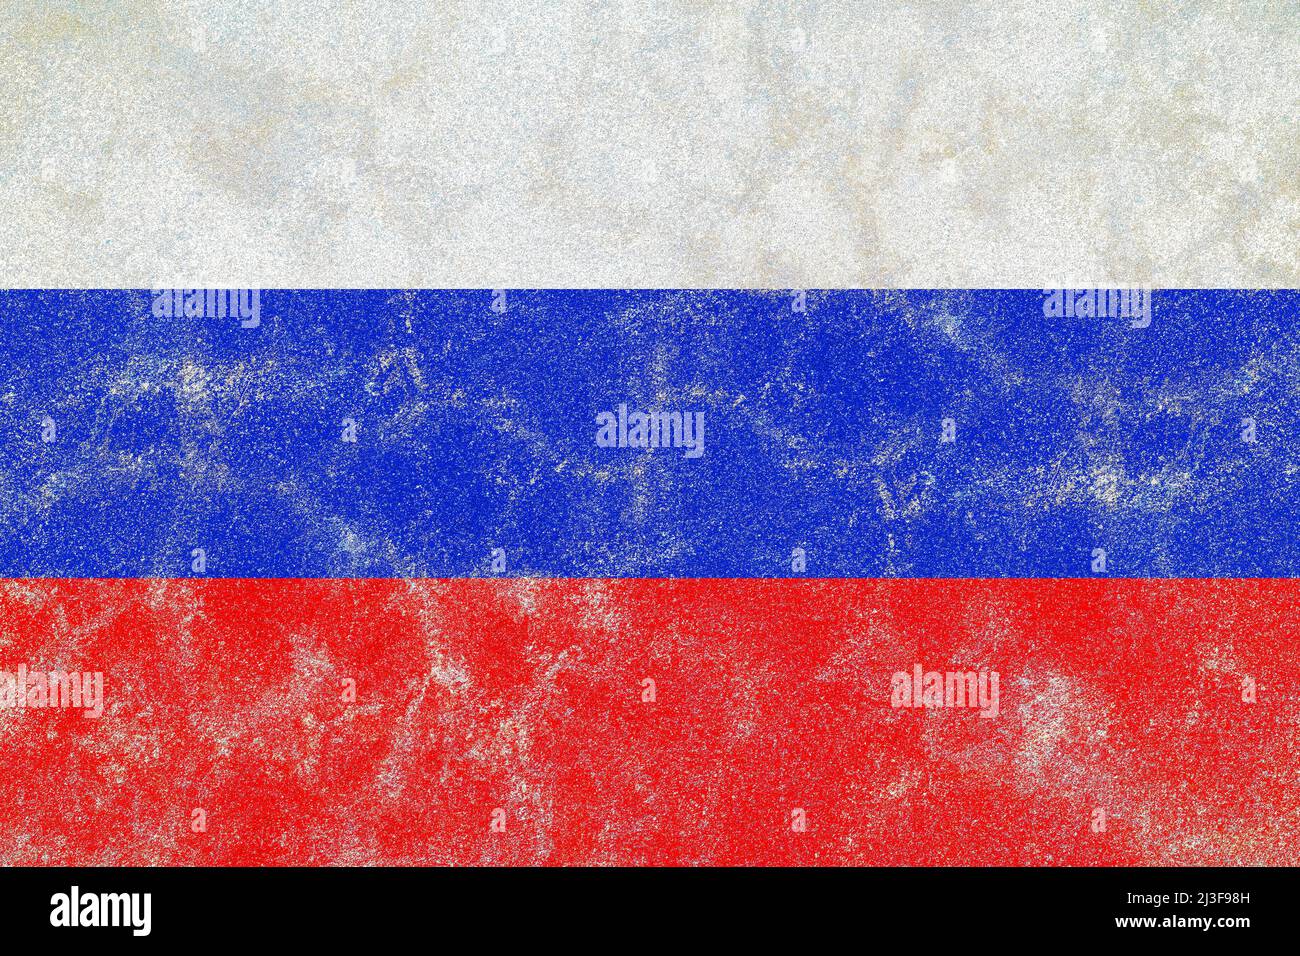 Russian national flag on a distressed old concrete wall surface Stock Photo